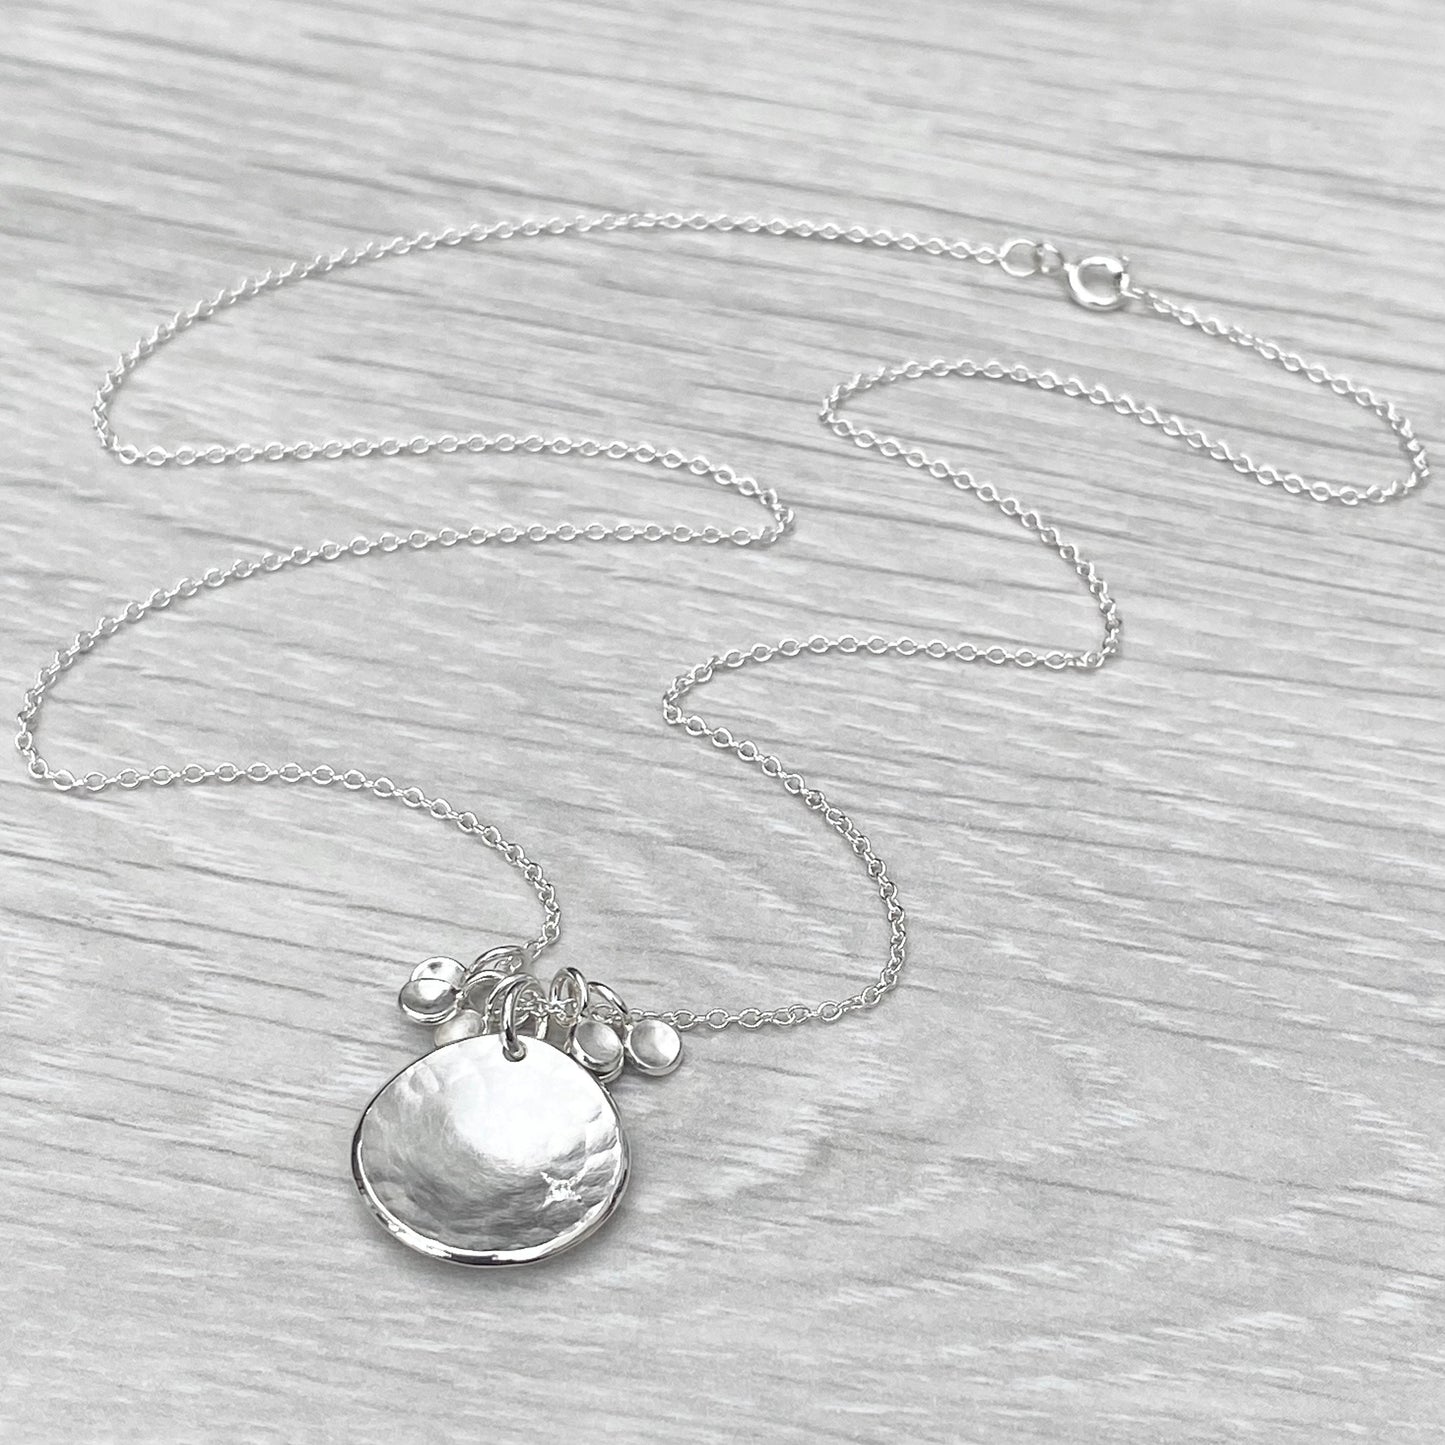 Handmade to order - Solid silver 16mm diamond kiss petal charm pendants on a 1.2mm wide trace chain